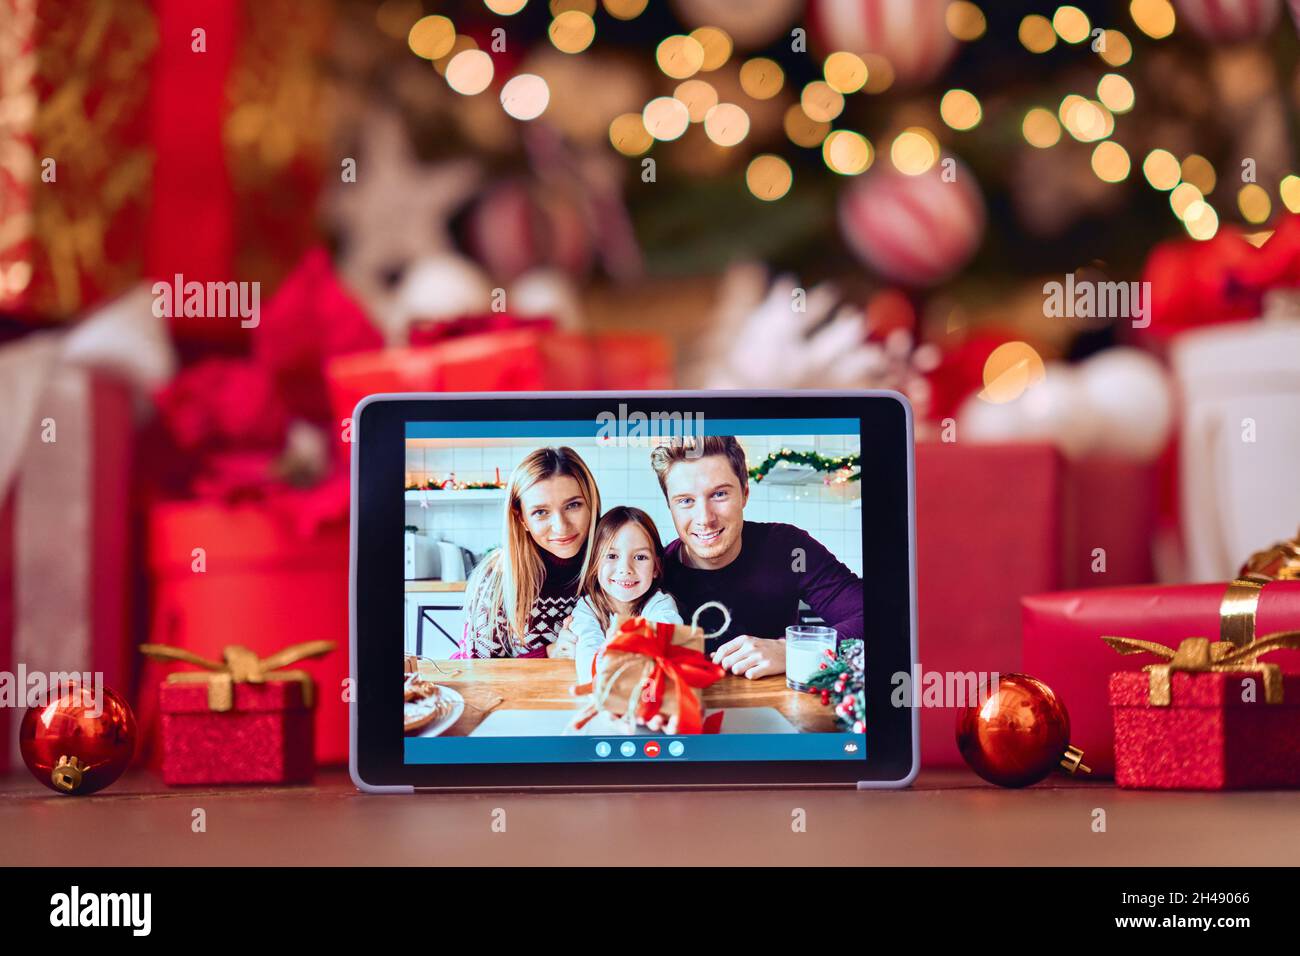 Family video call on digital tablet screen on Christmas table background. Stock Photo